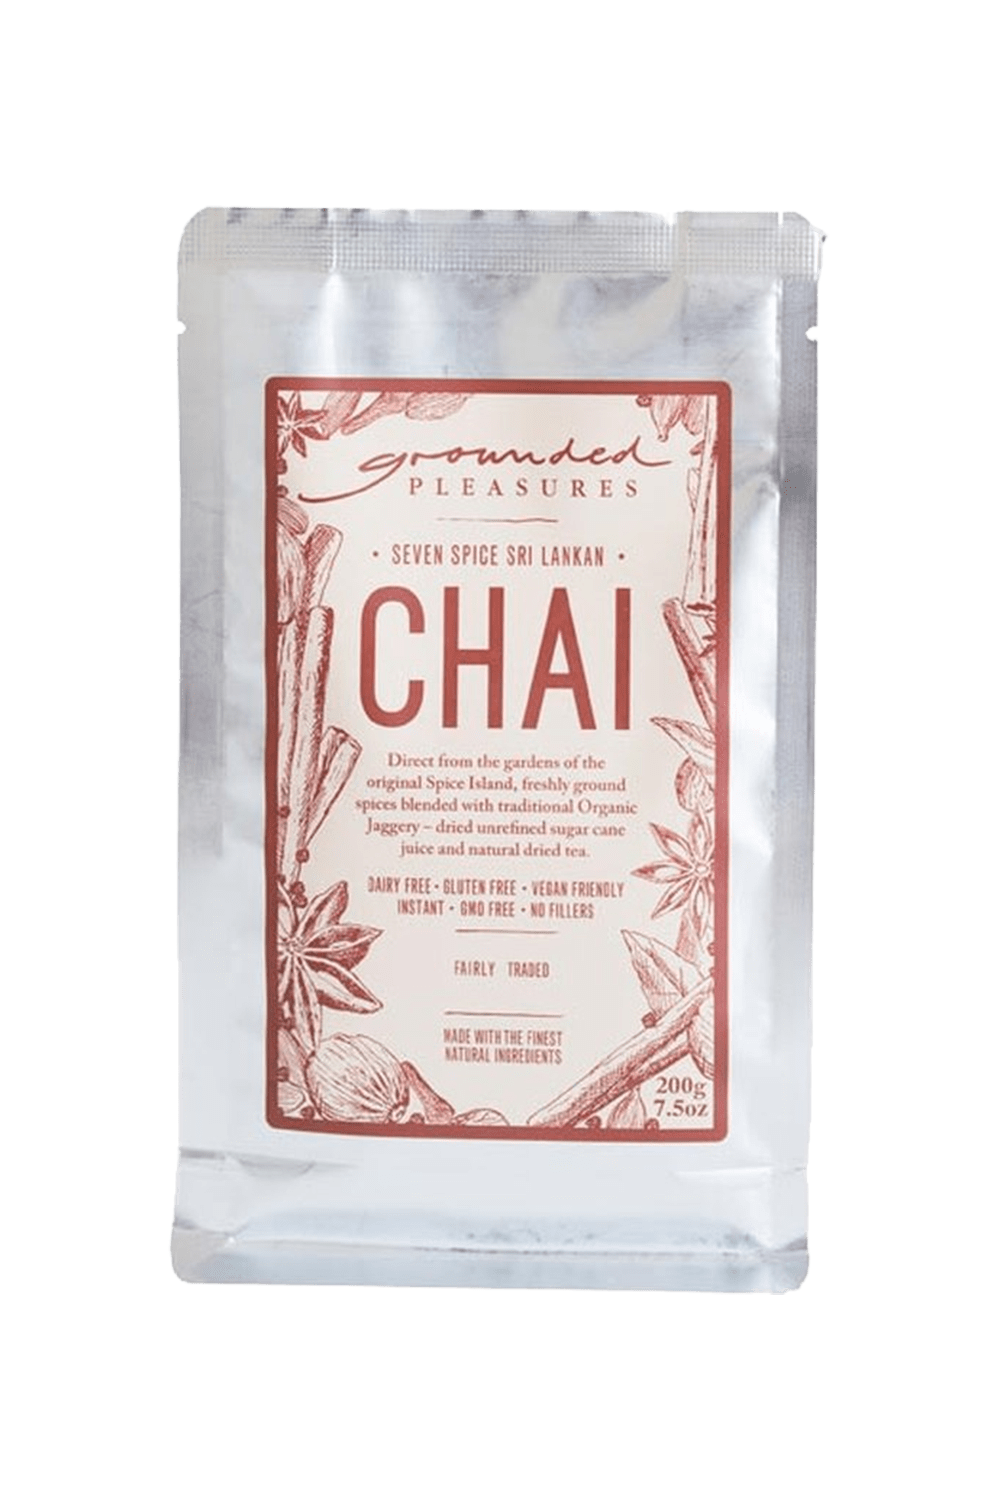 buy cafe products grounded pleasures drinking chocolate seven spice chai